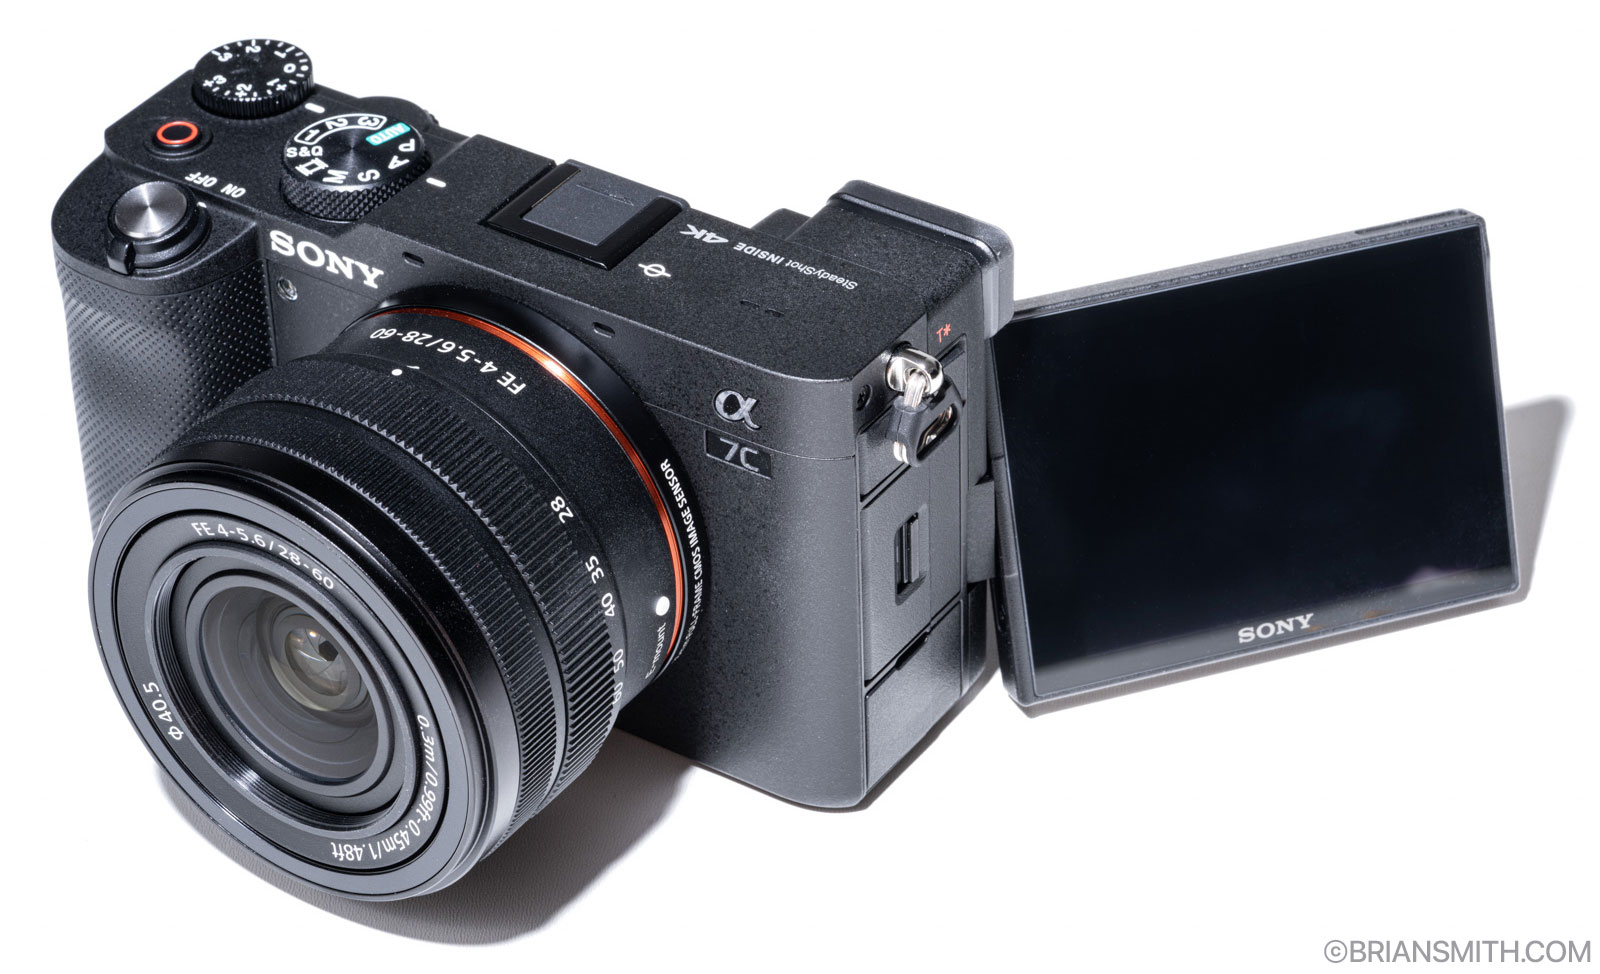 Sony A7C Review: A Travel Photographer's Dream